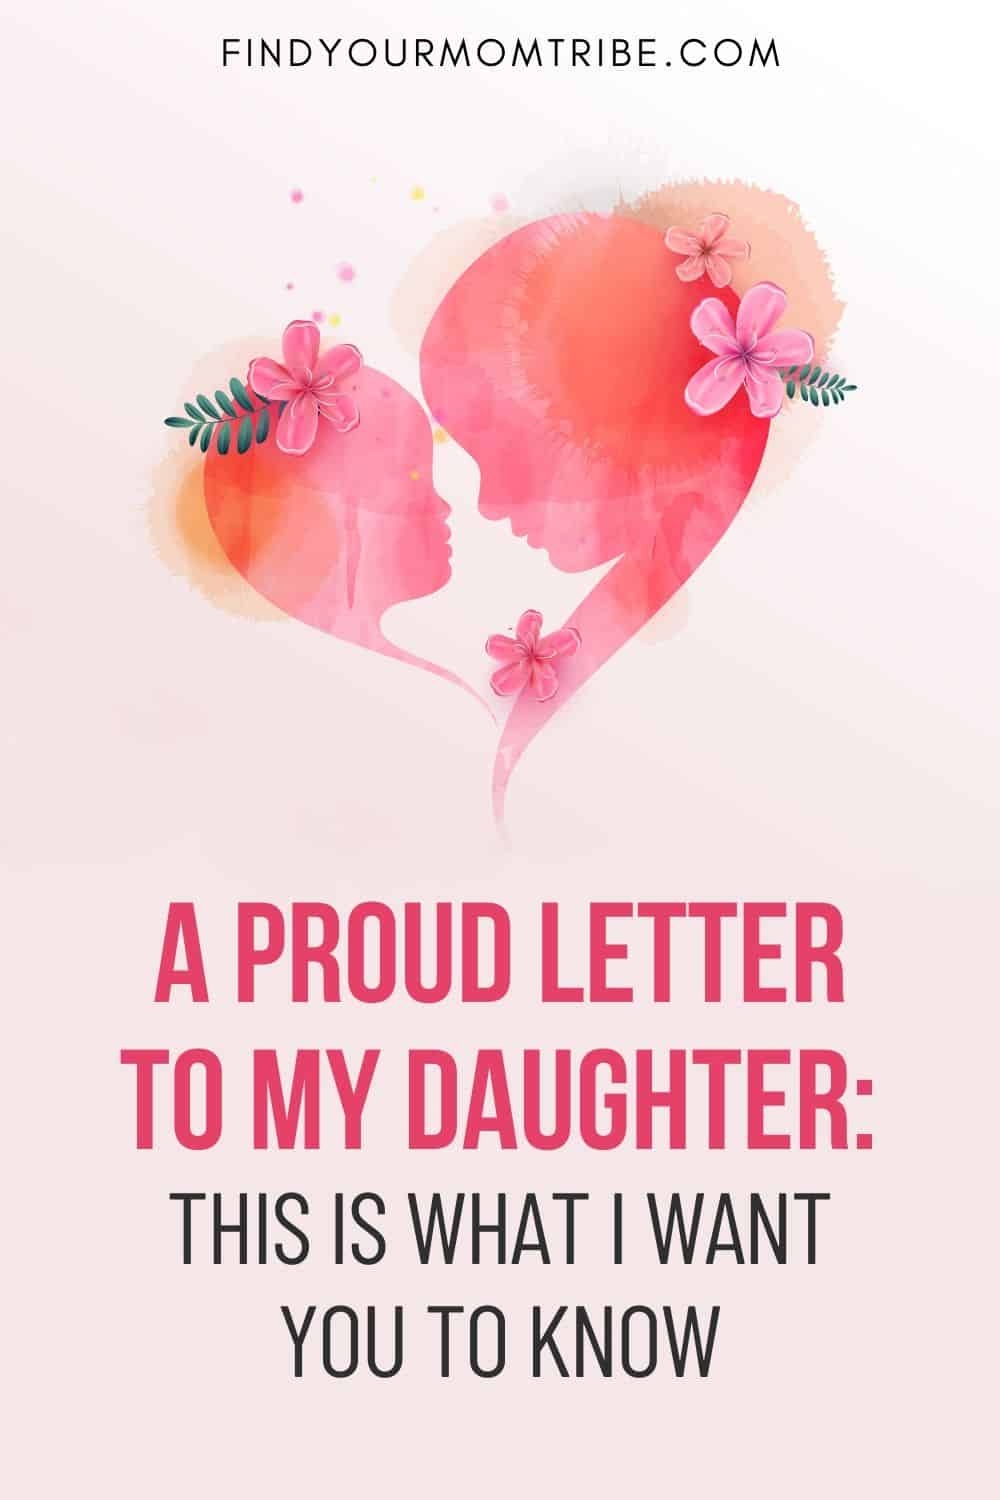 Help me write a letter to my daughter